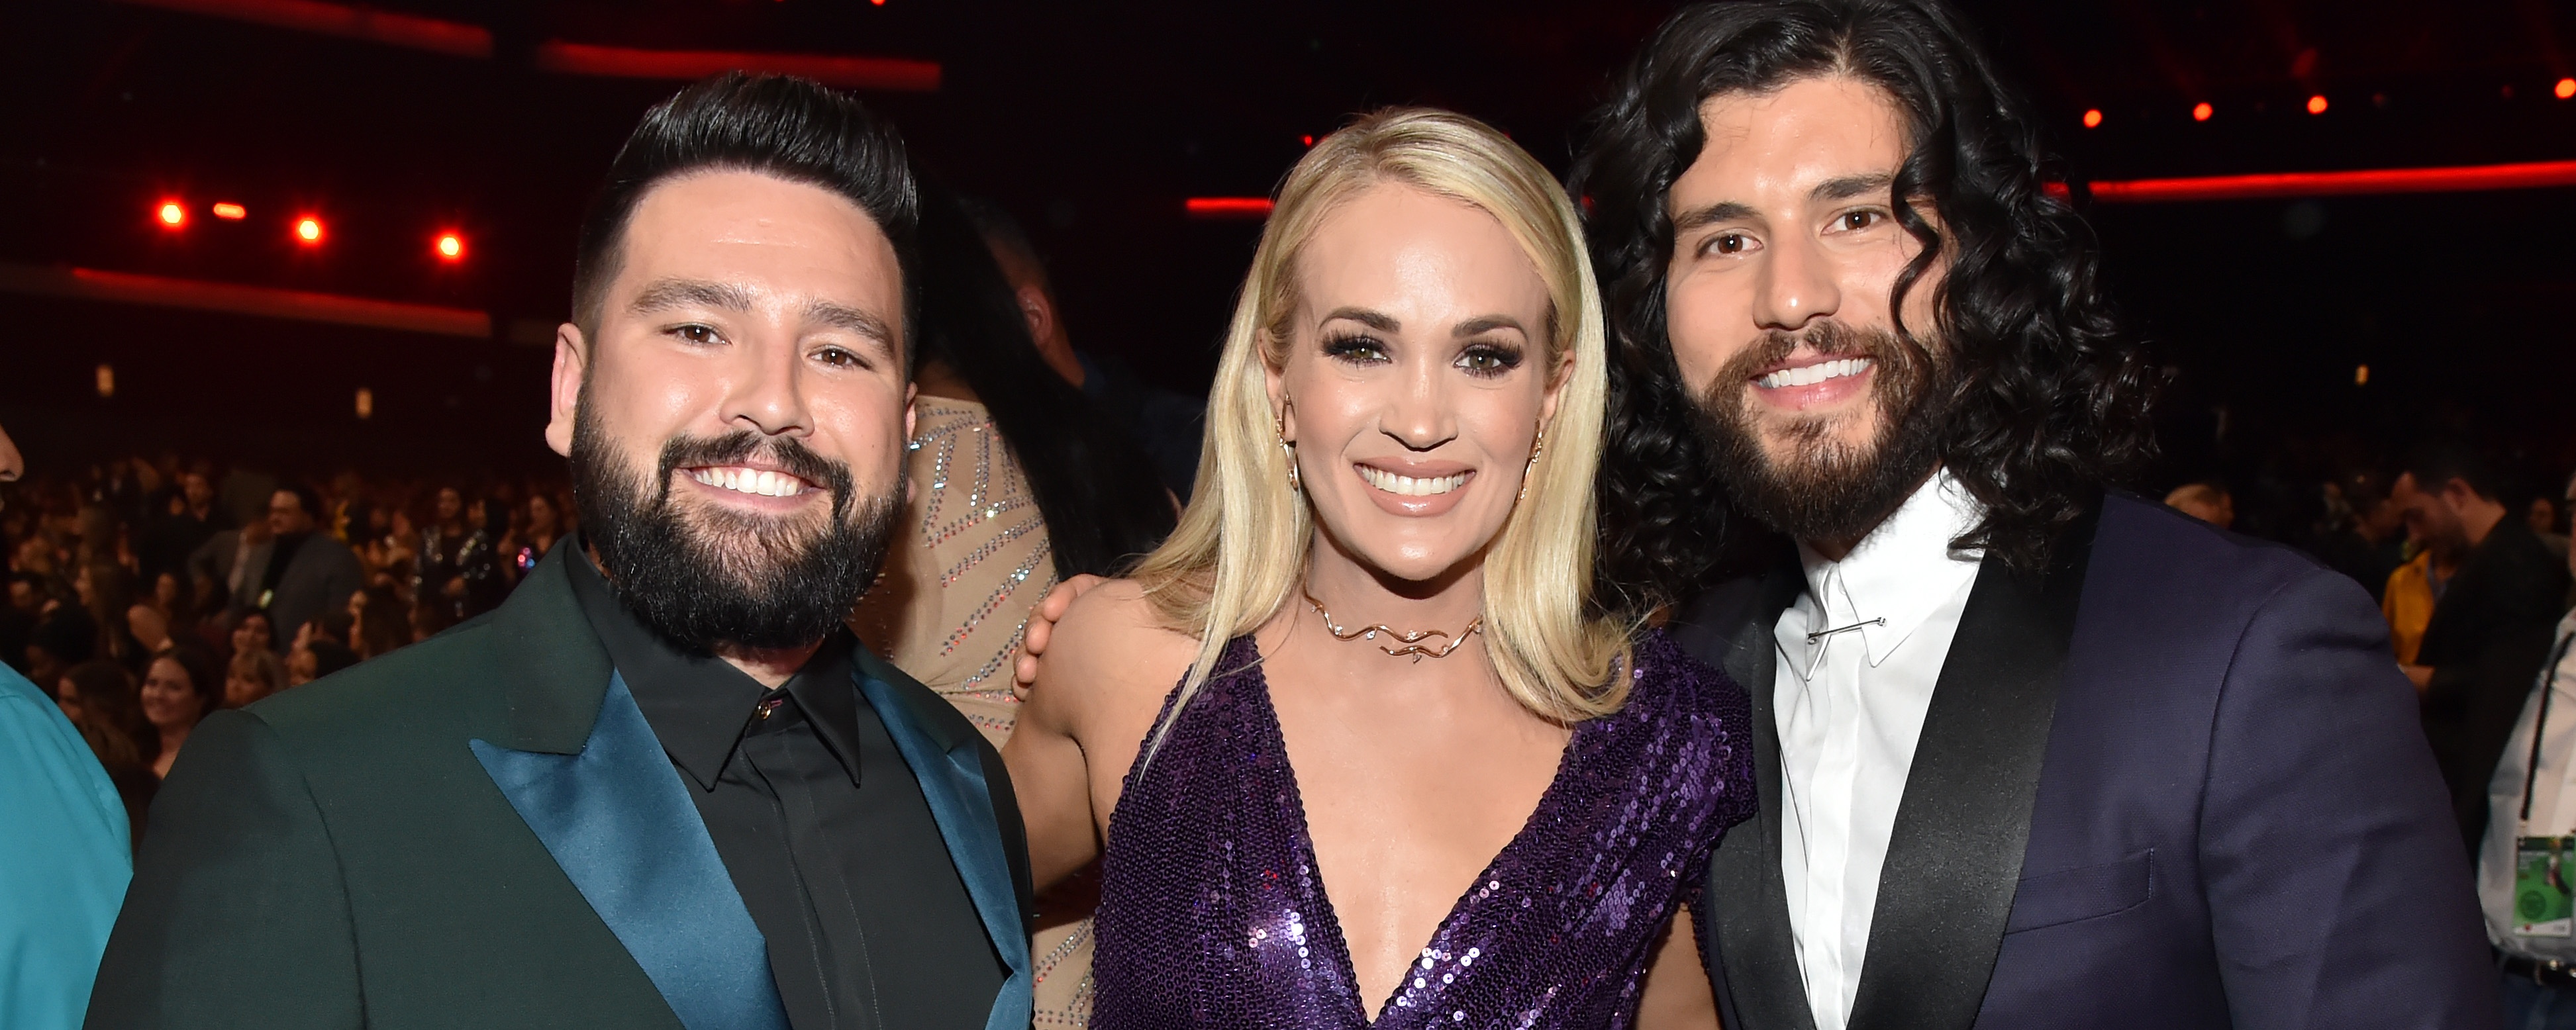 Carrie Underwood and Dan + Shay Team Up For ‘Dear Evan Hansen’ Cover